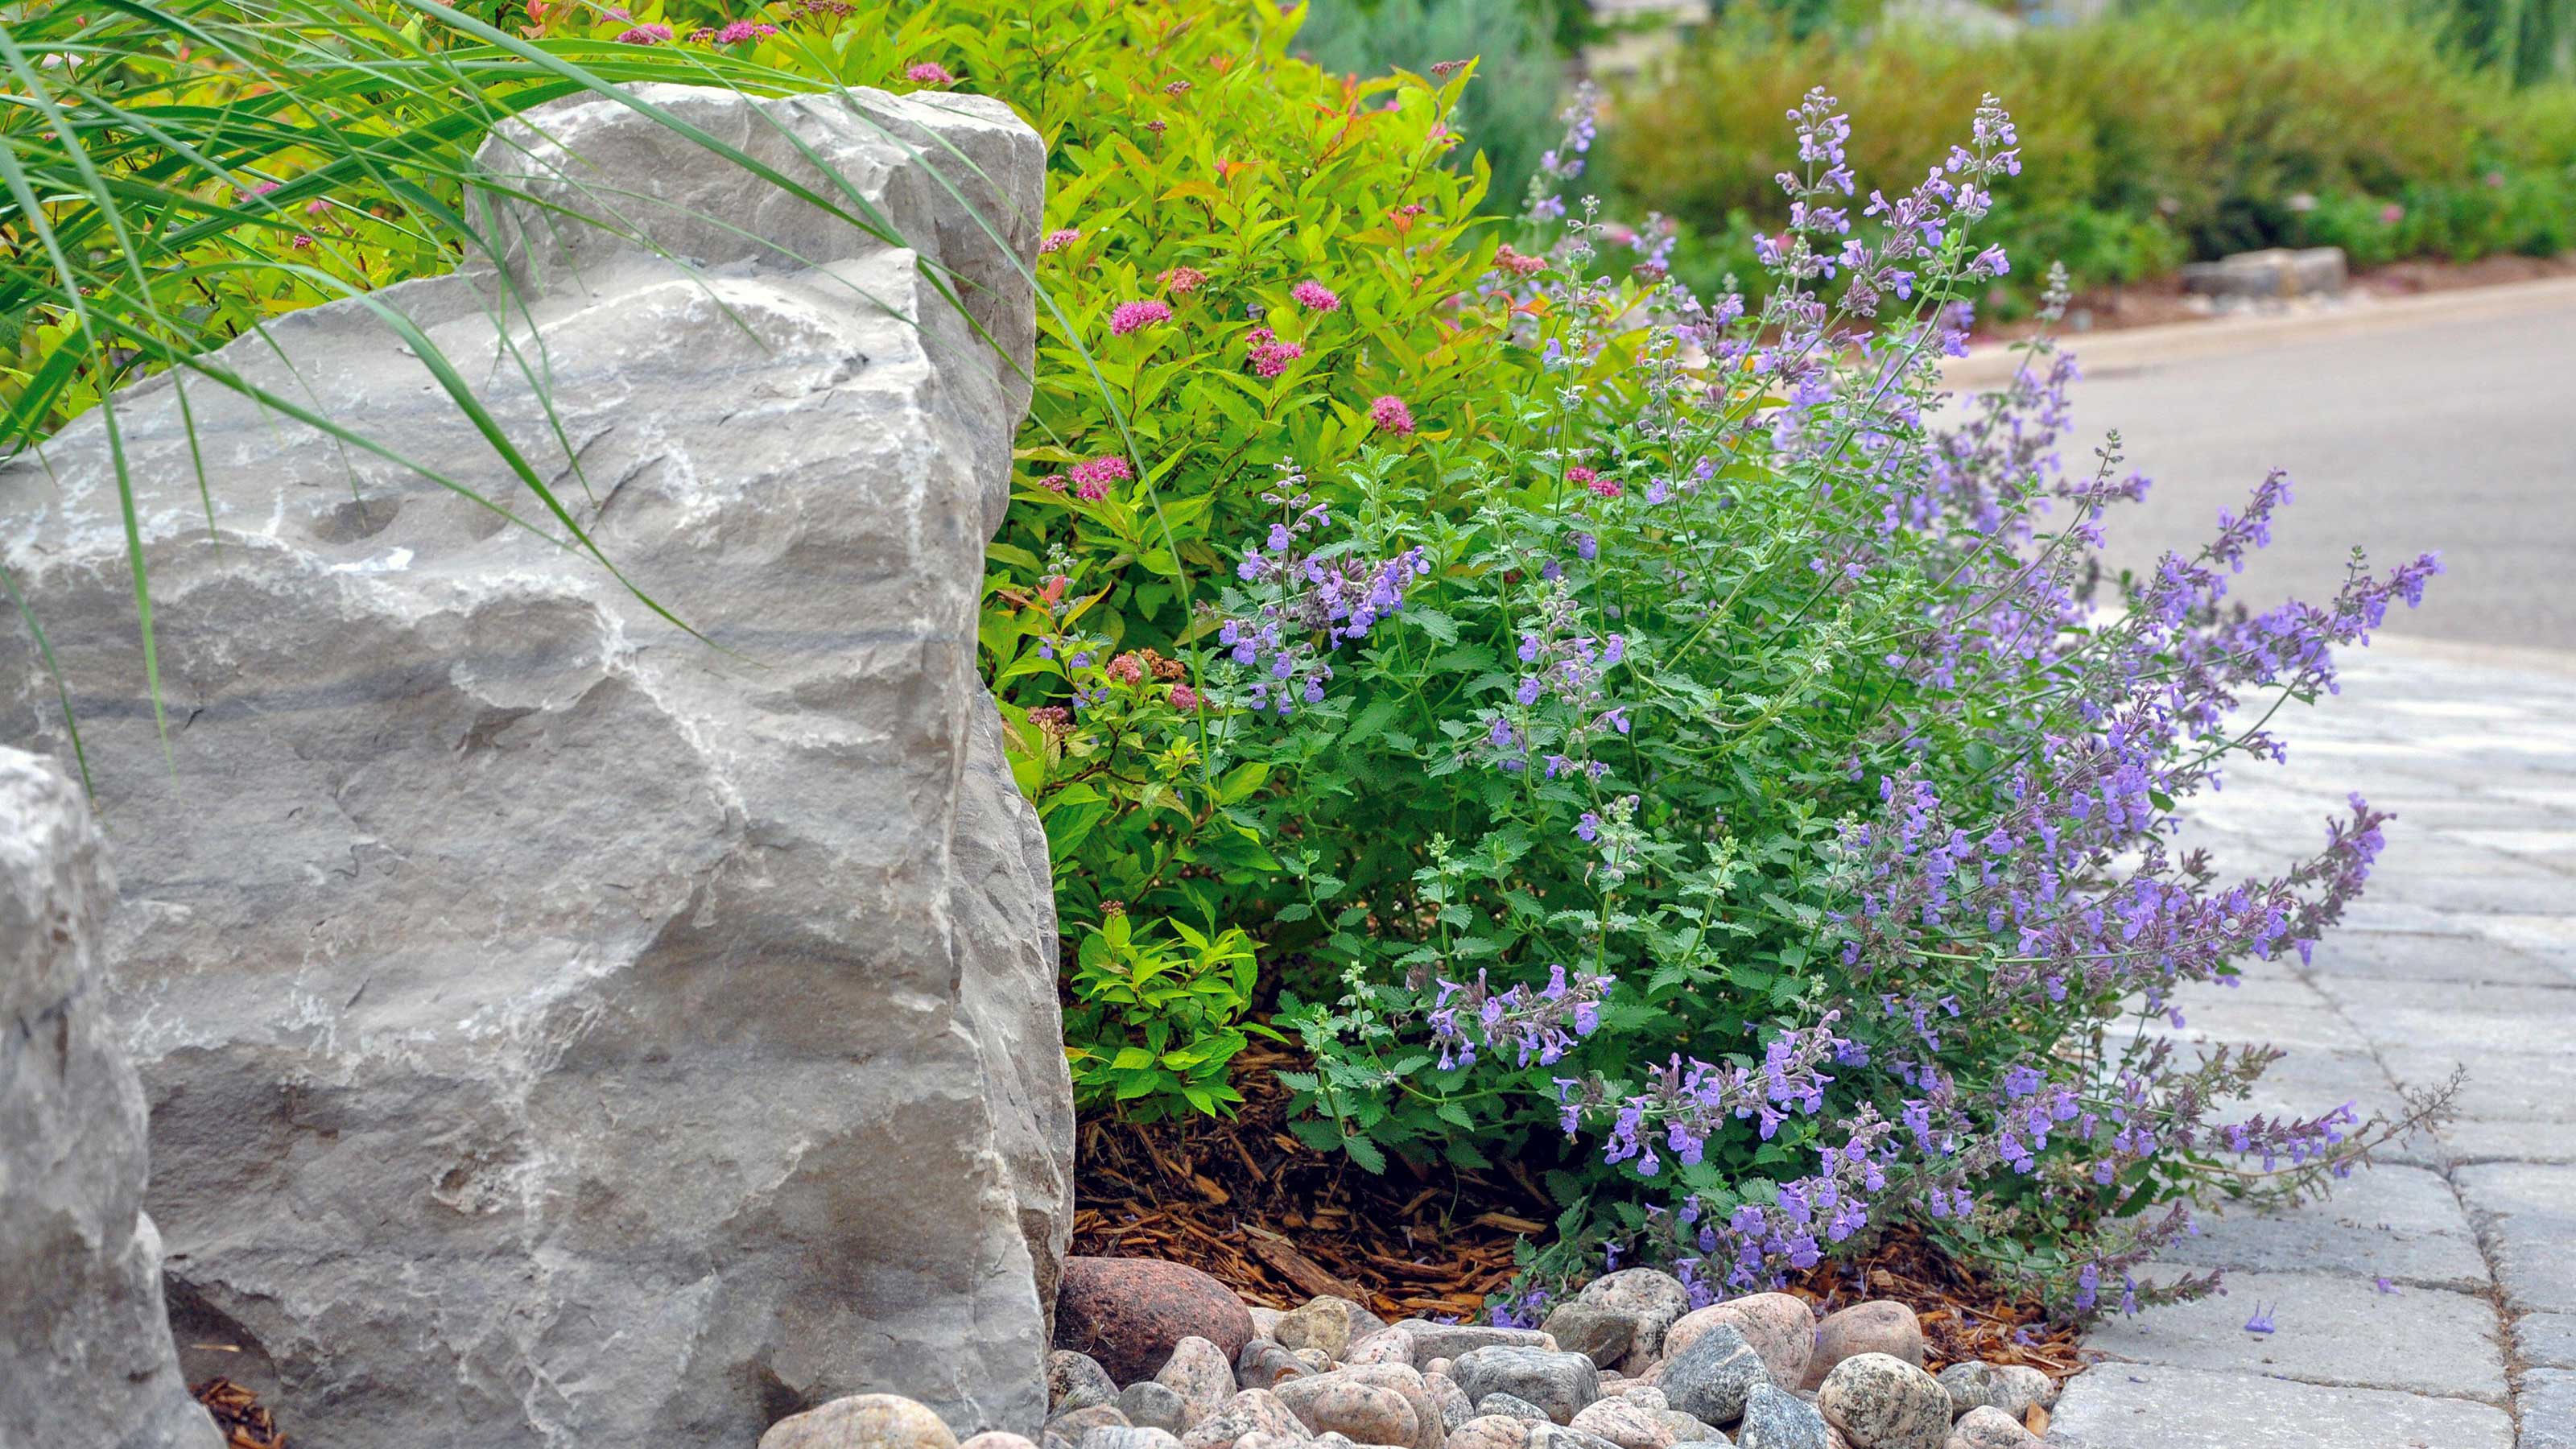 How To Clean Landscape Rocks Without Killing Plants? | Cleanestor